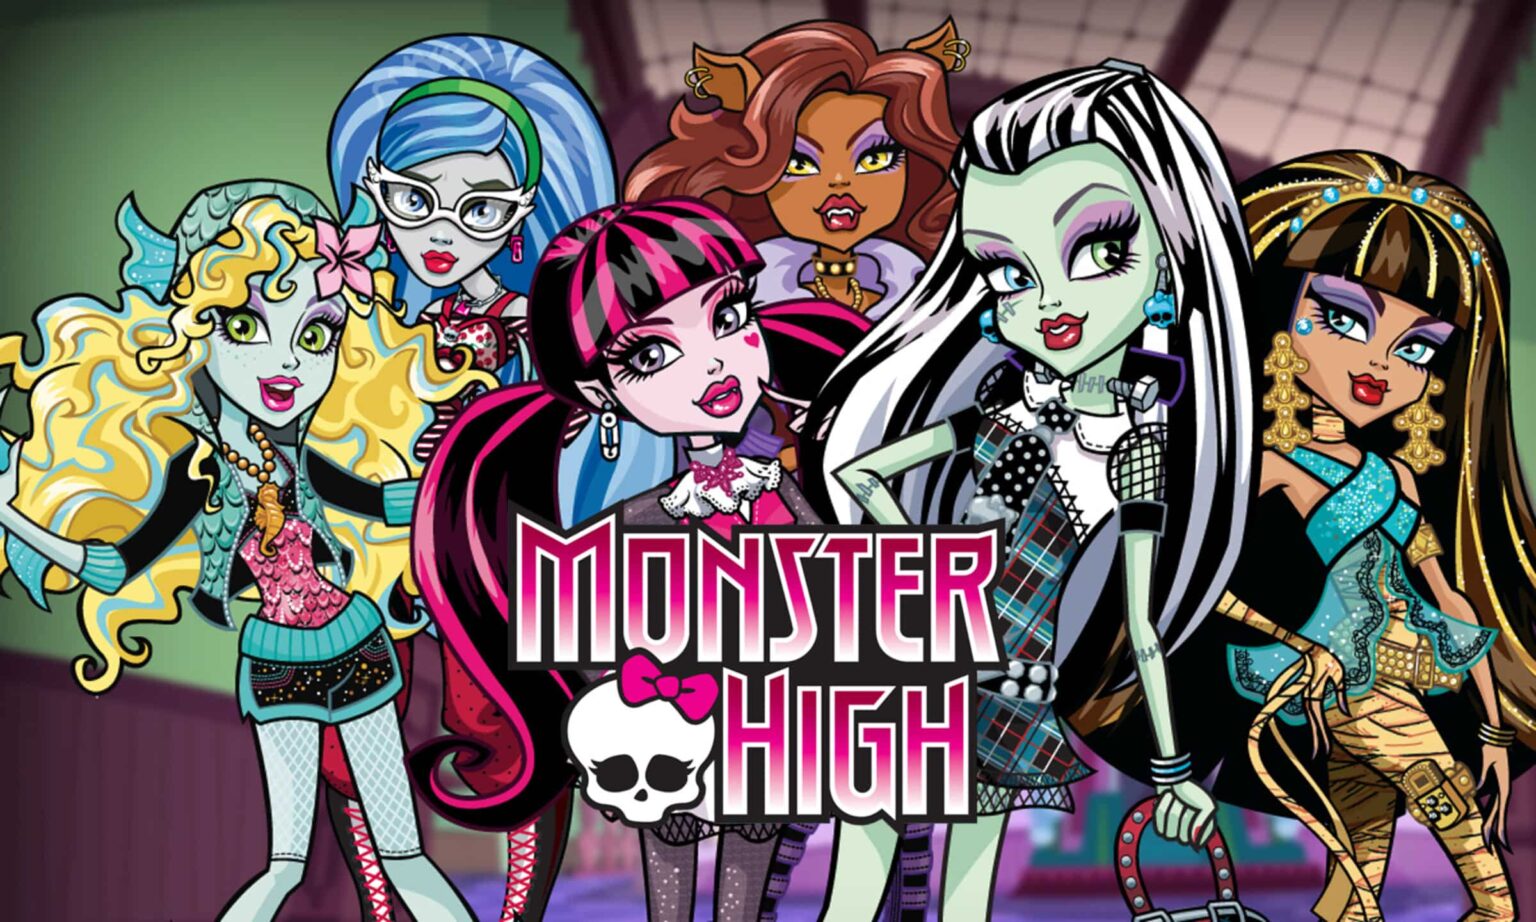 Remember 'Monsters High'? Let's take a look at some of their most iconic characters! Get nostalgic with their wonderful adventures in the town of New Salem.